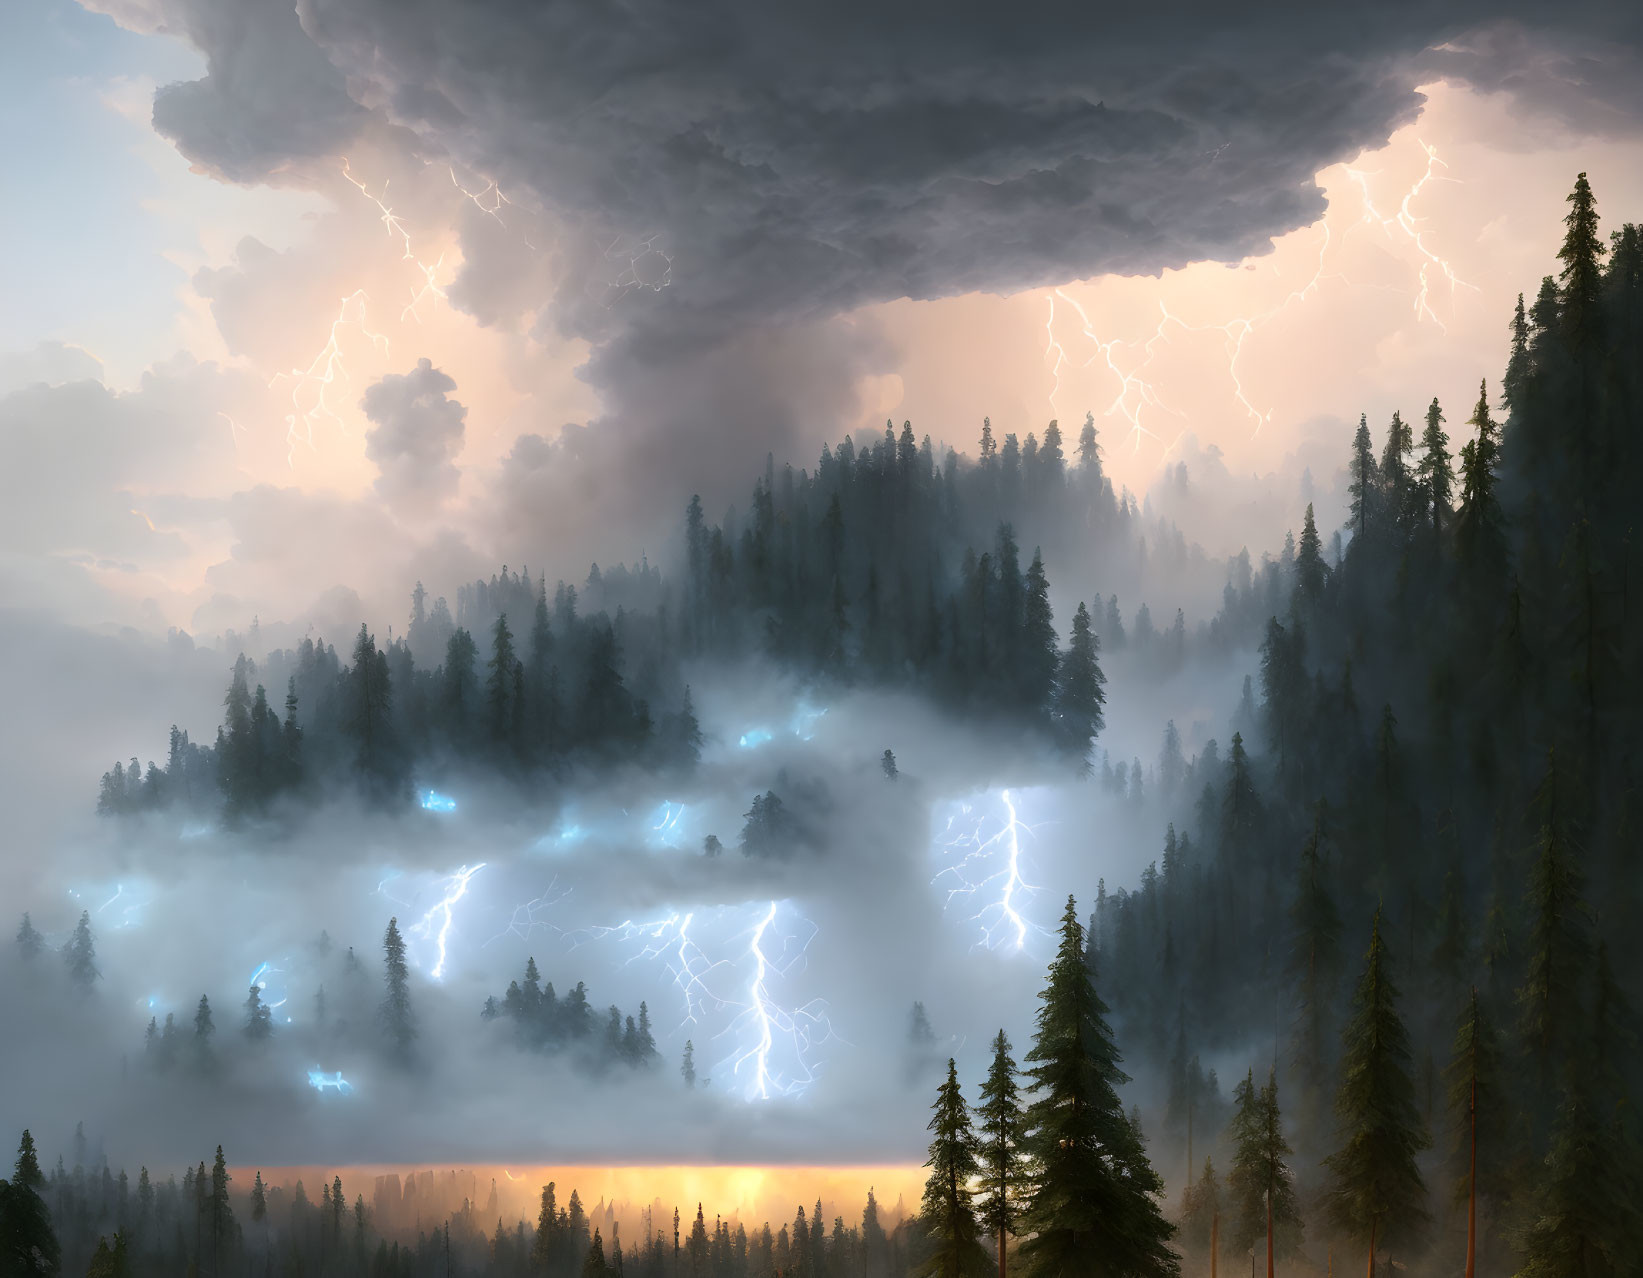 Dramatic thunderstorm over dense forest with lightning strikes